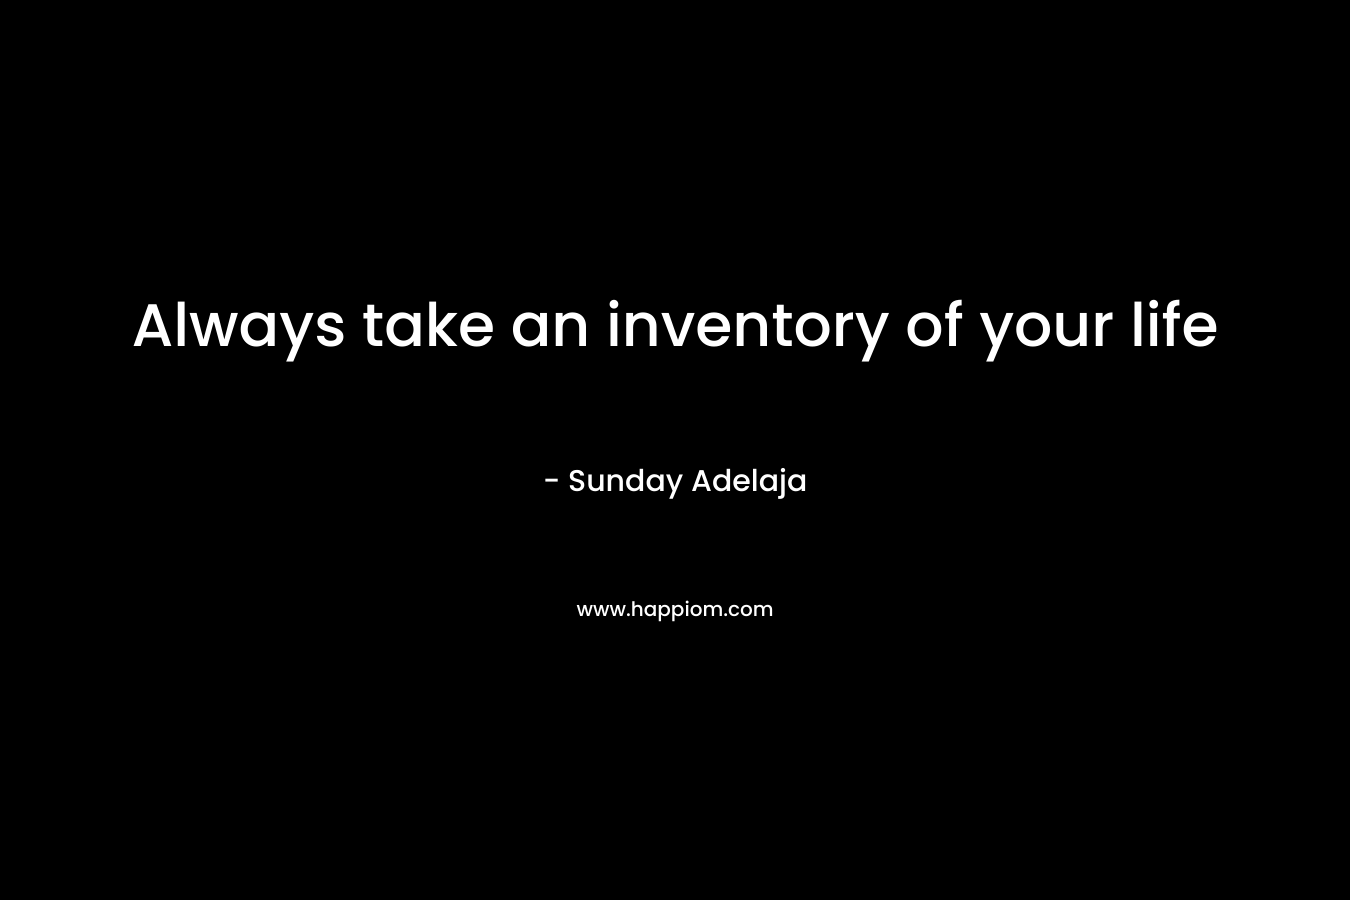 Always take an inventory of your life